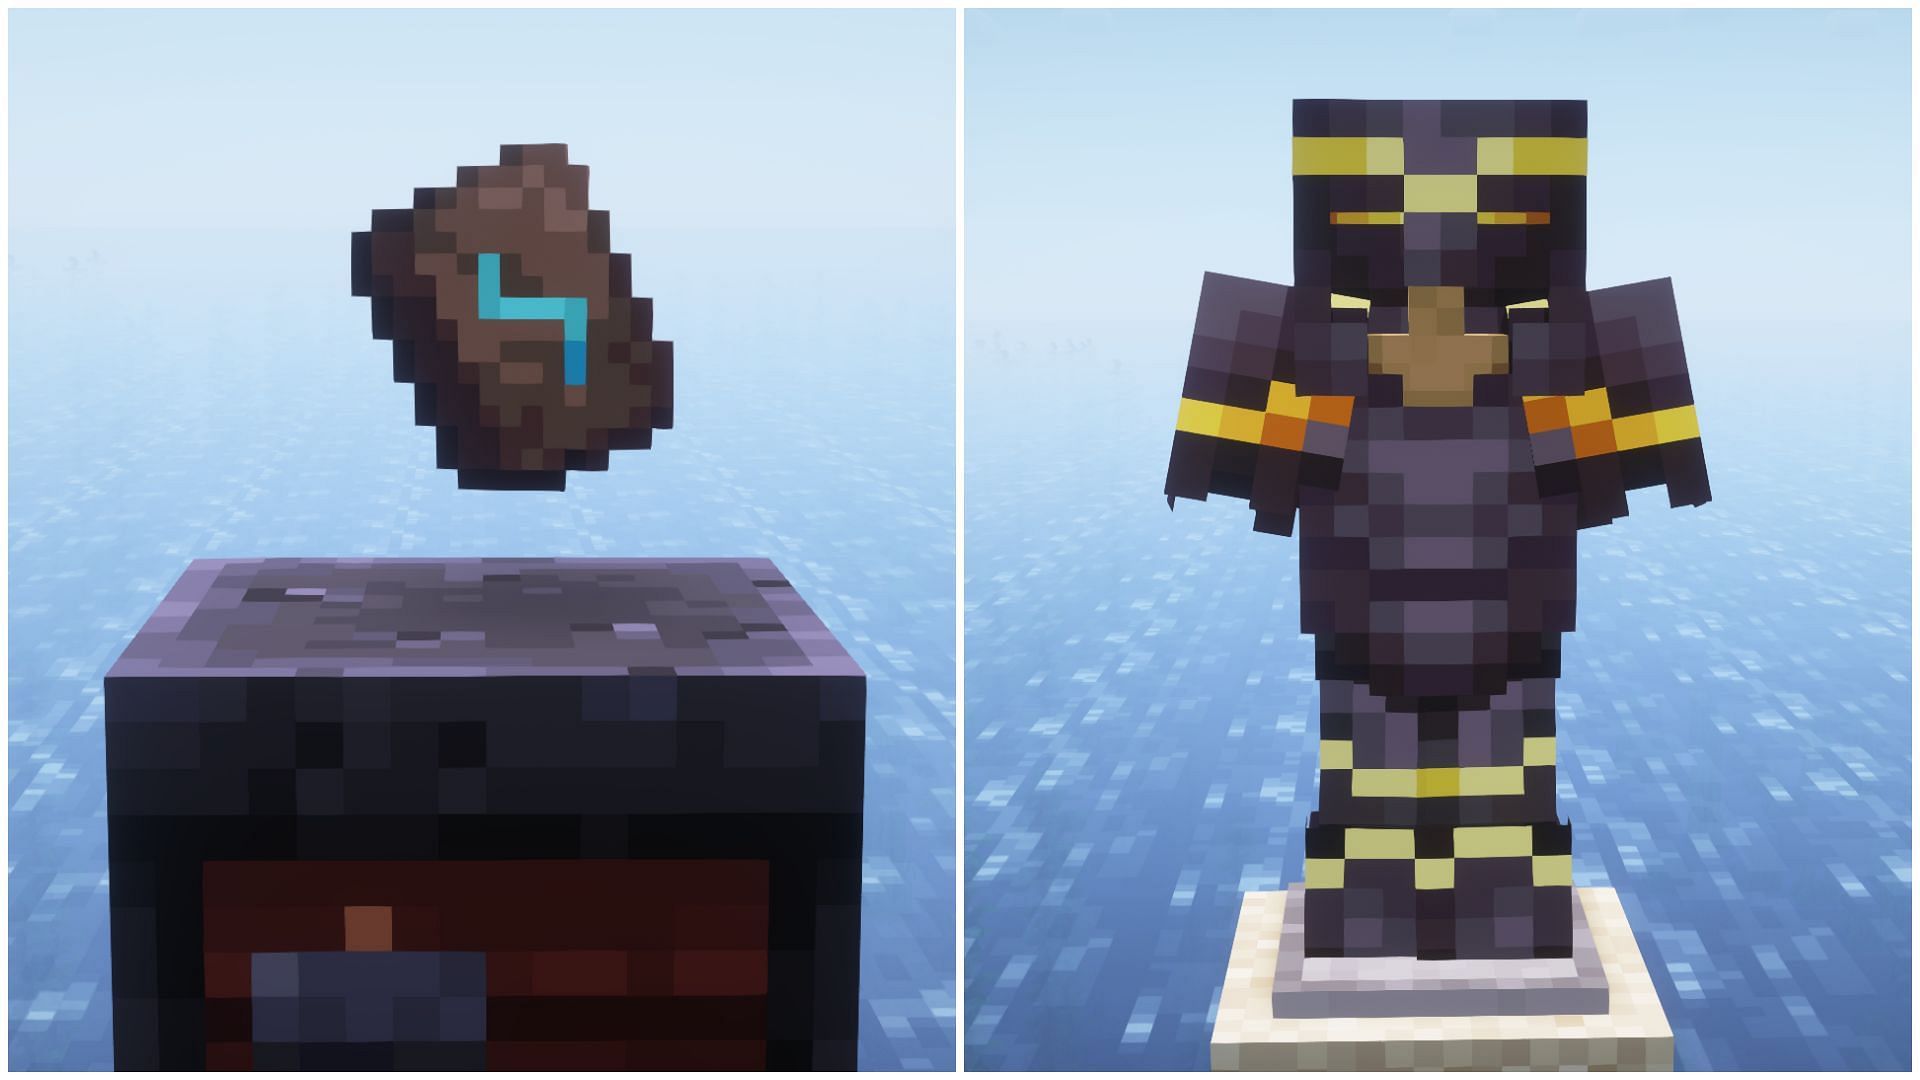 Shaper armor trim can be used on any armor part in Minecraft (Image via Sportskeeda)